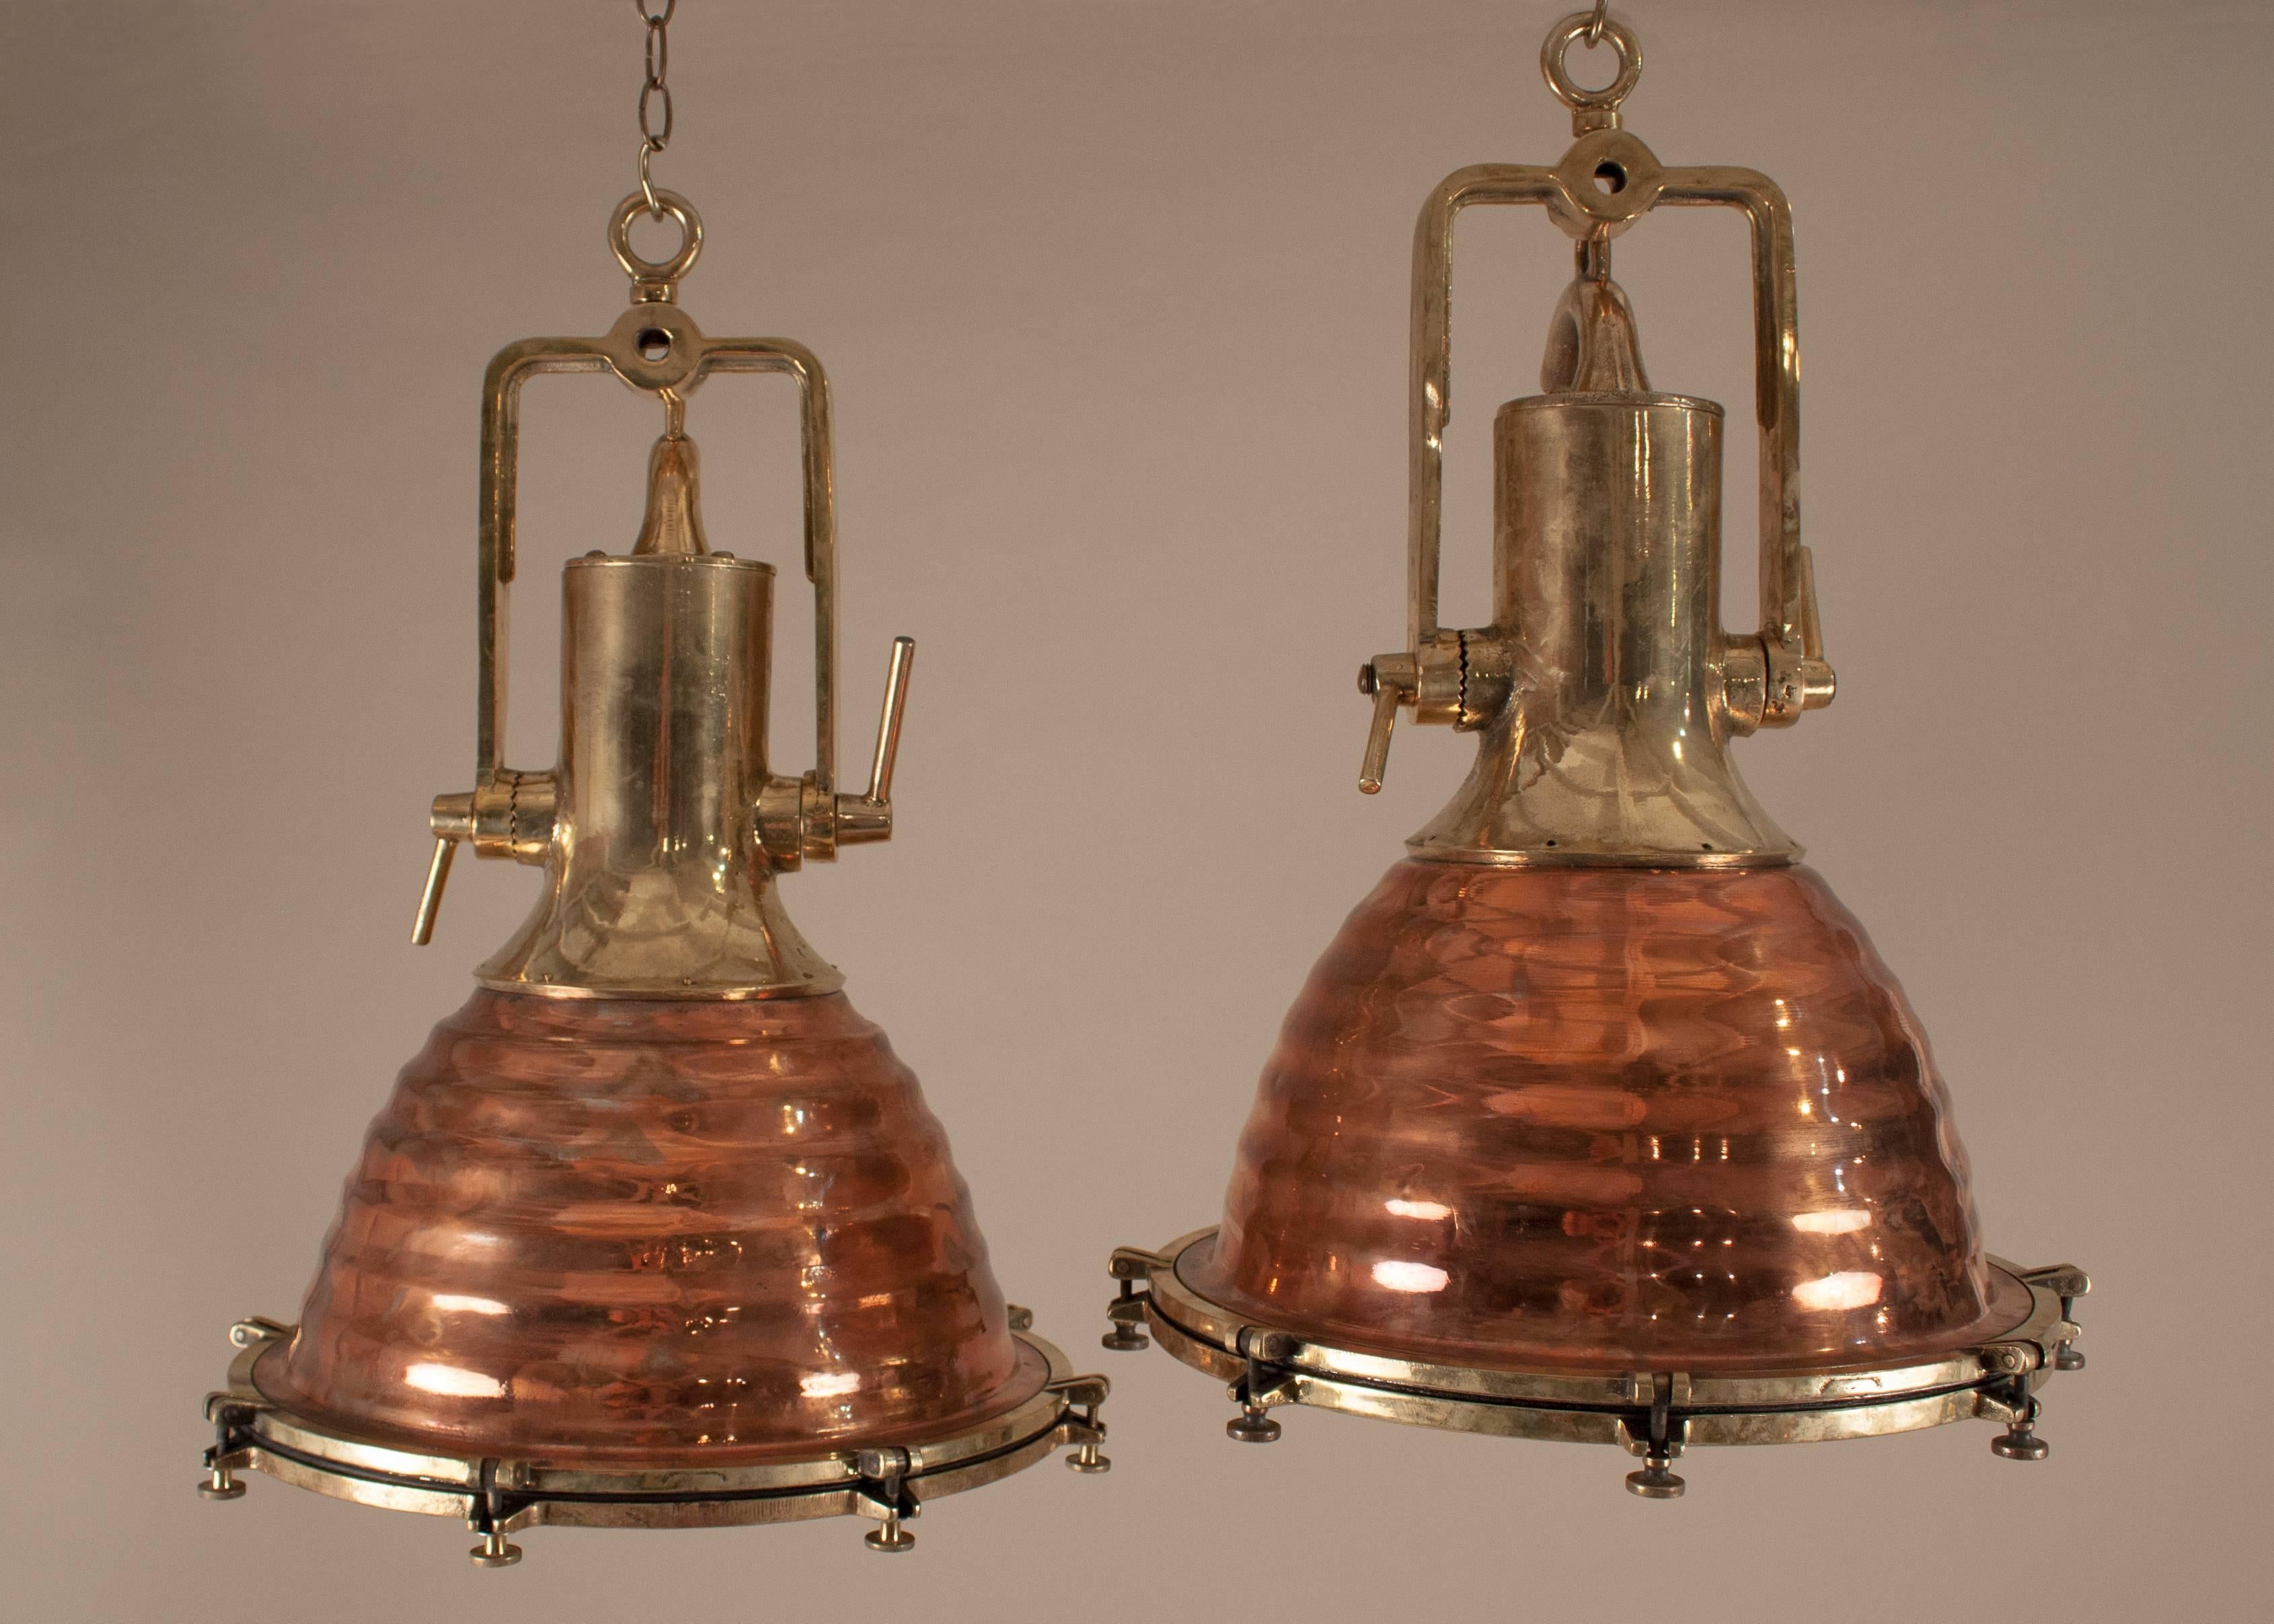 An authentic pair of large polished copper and brass ship's deck or cargo spotlights with fluted exteriors, copper interiors and tempered glass lenses. Salvaged from a maritime vessel, these mid-century nautical pendants have wonderful form and